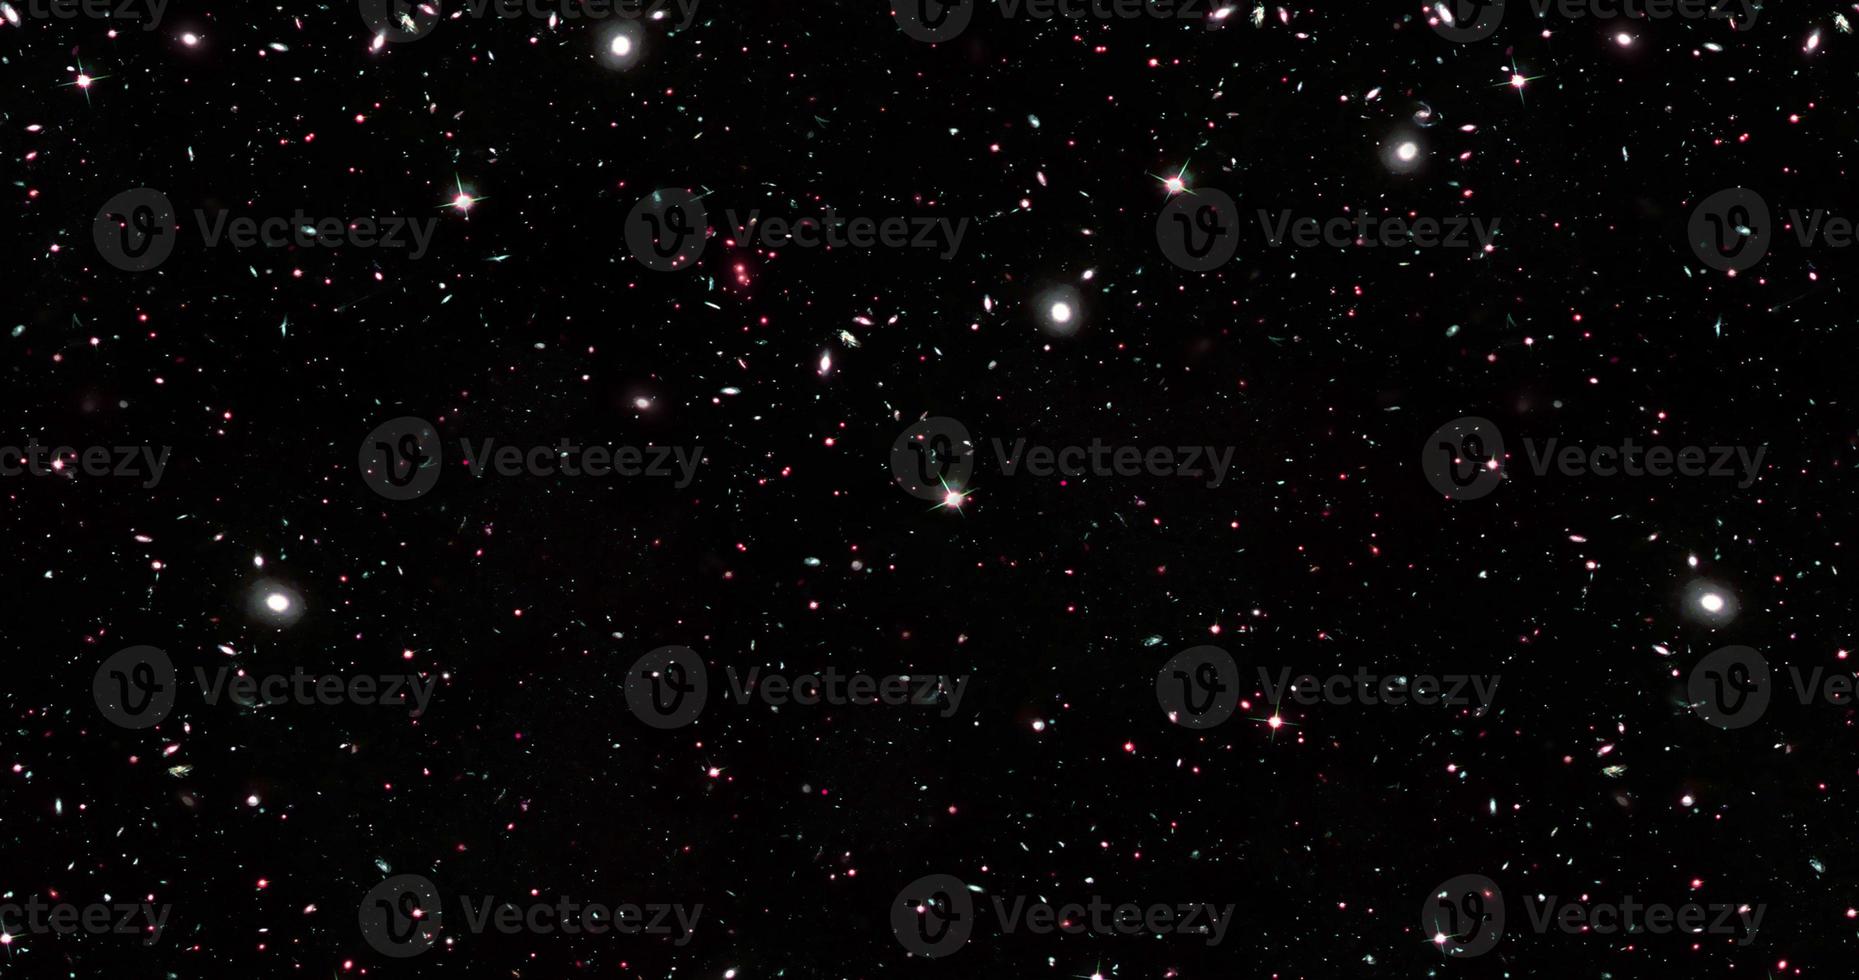 background of abstract galaxies with stars and planets with galaxy motifs in black and white space of night light universe photo